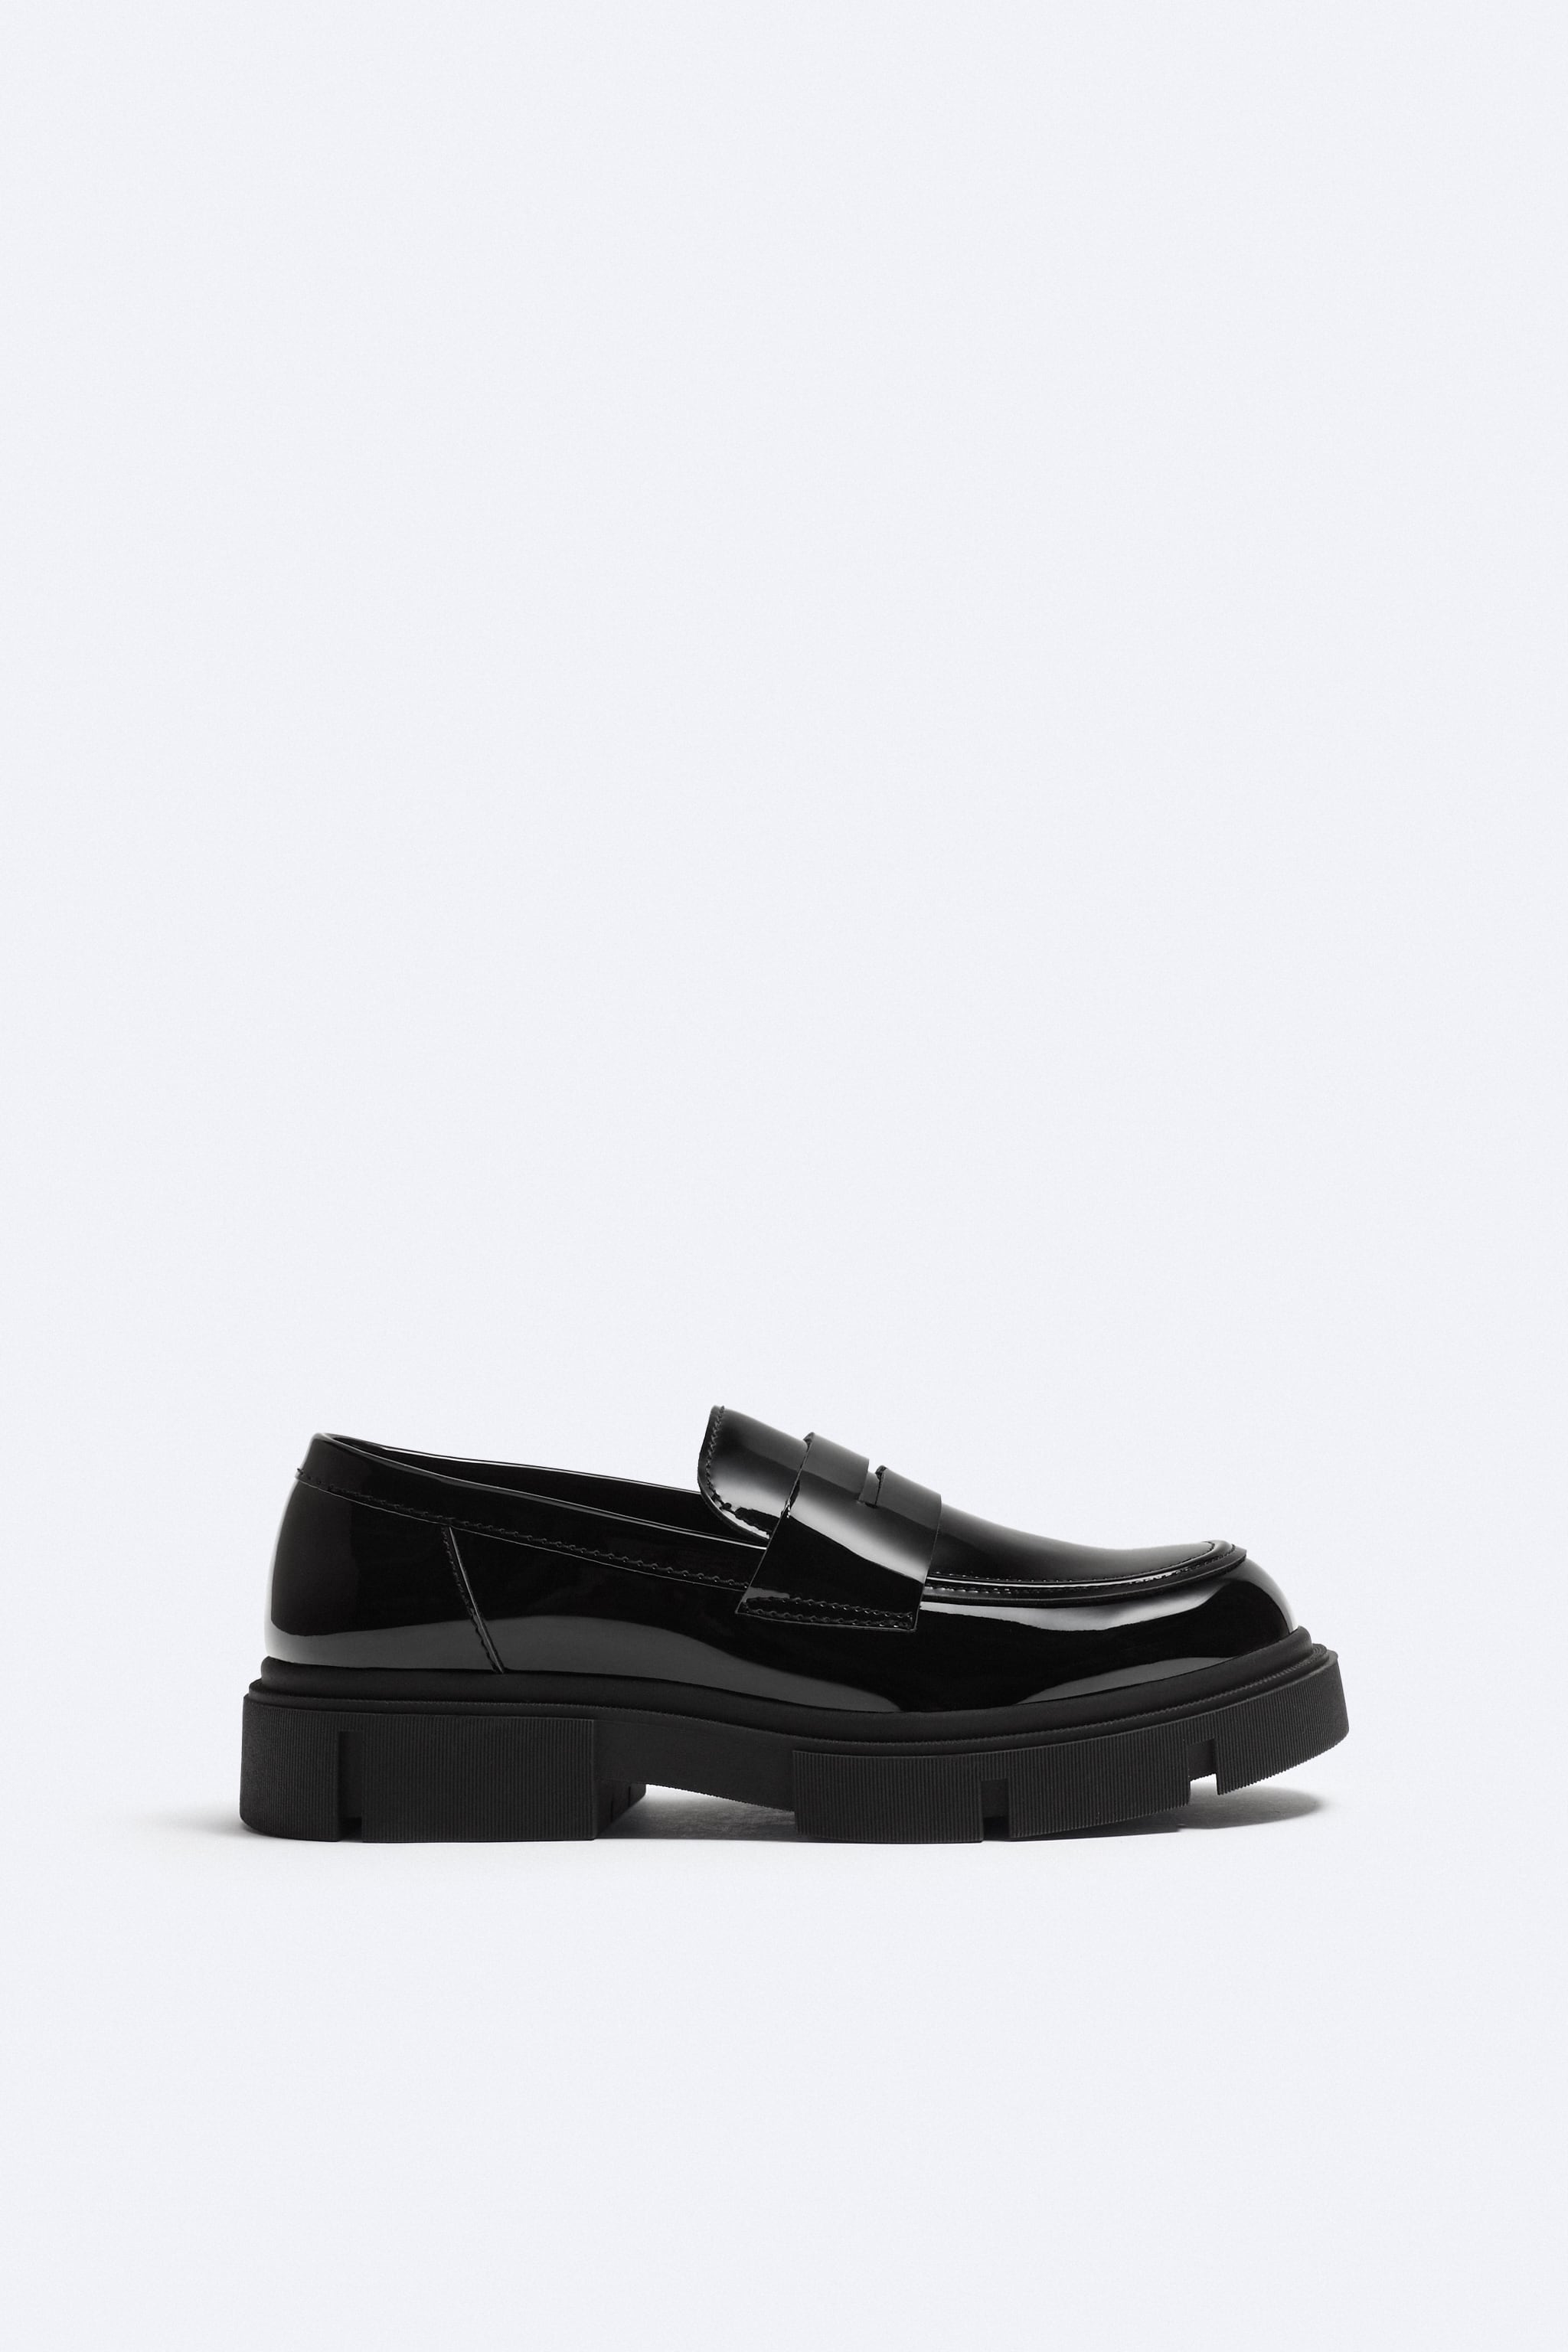 CHUNKY SOLE PATENT FINISH PENNY LOAFERS